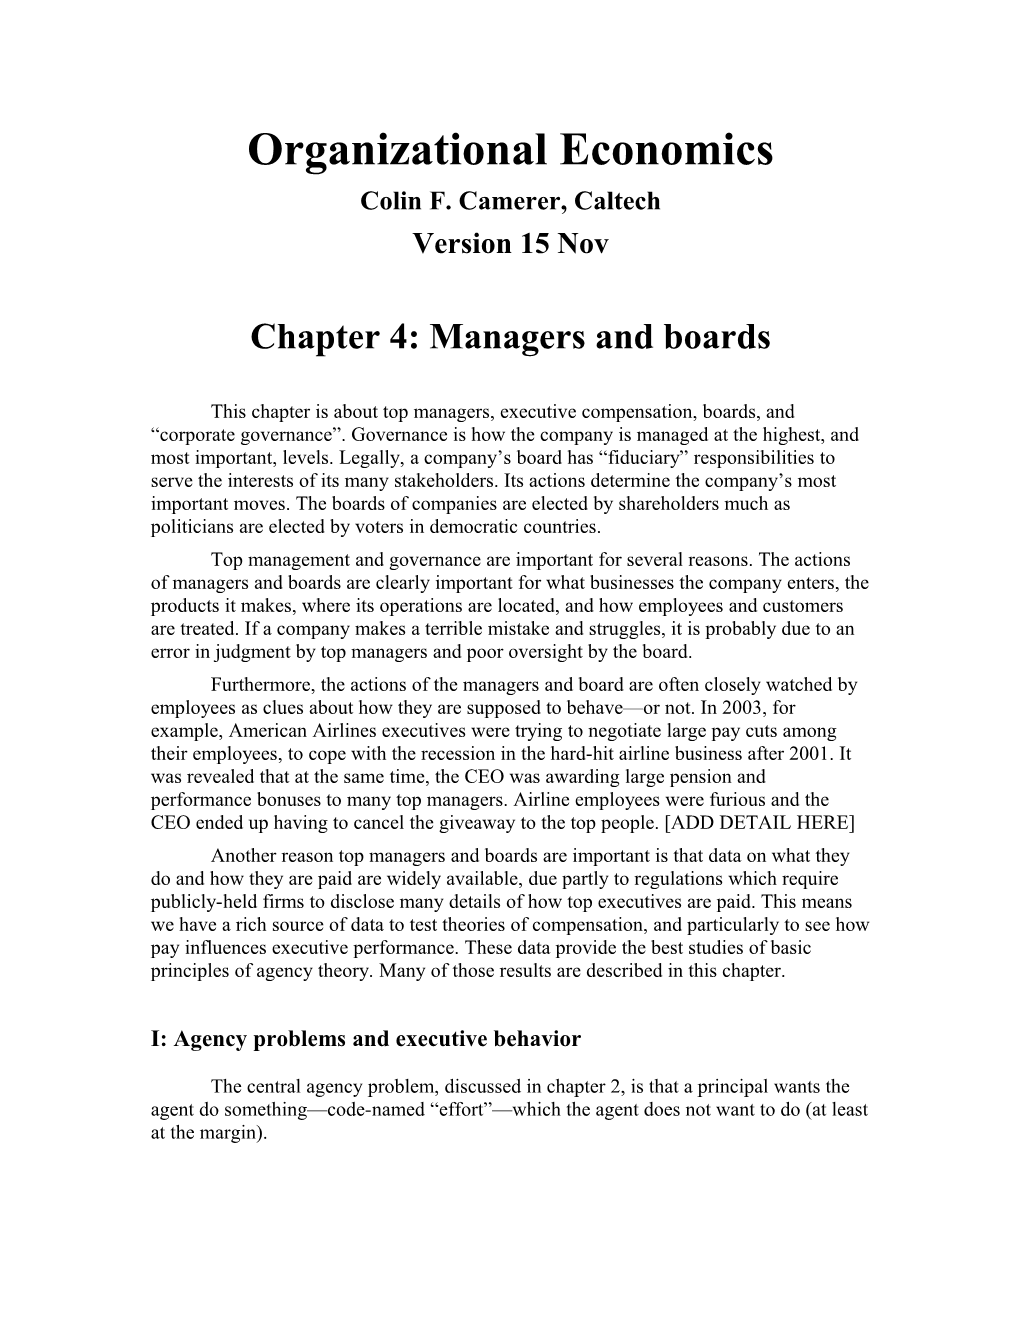 Chapter 4: Managers and Boards